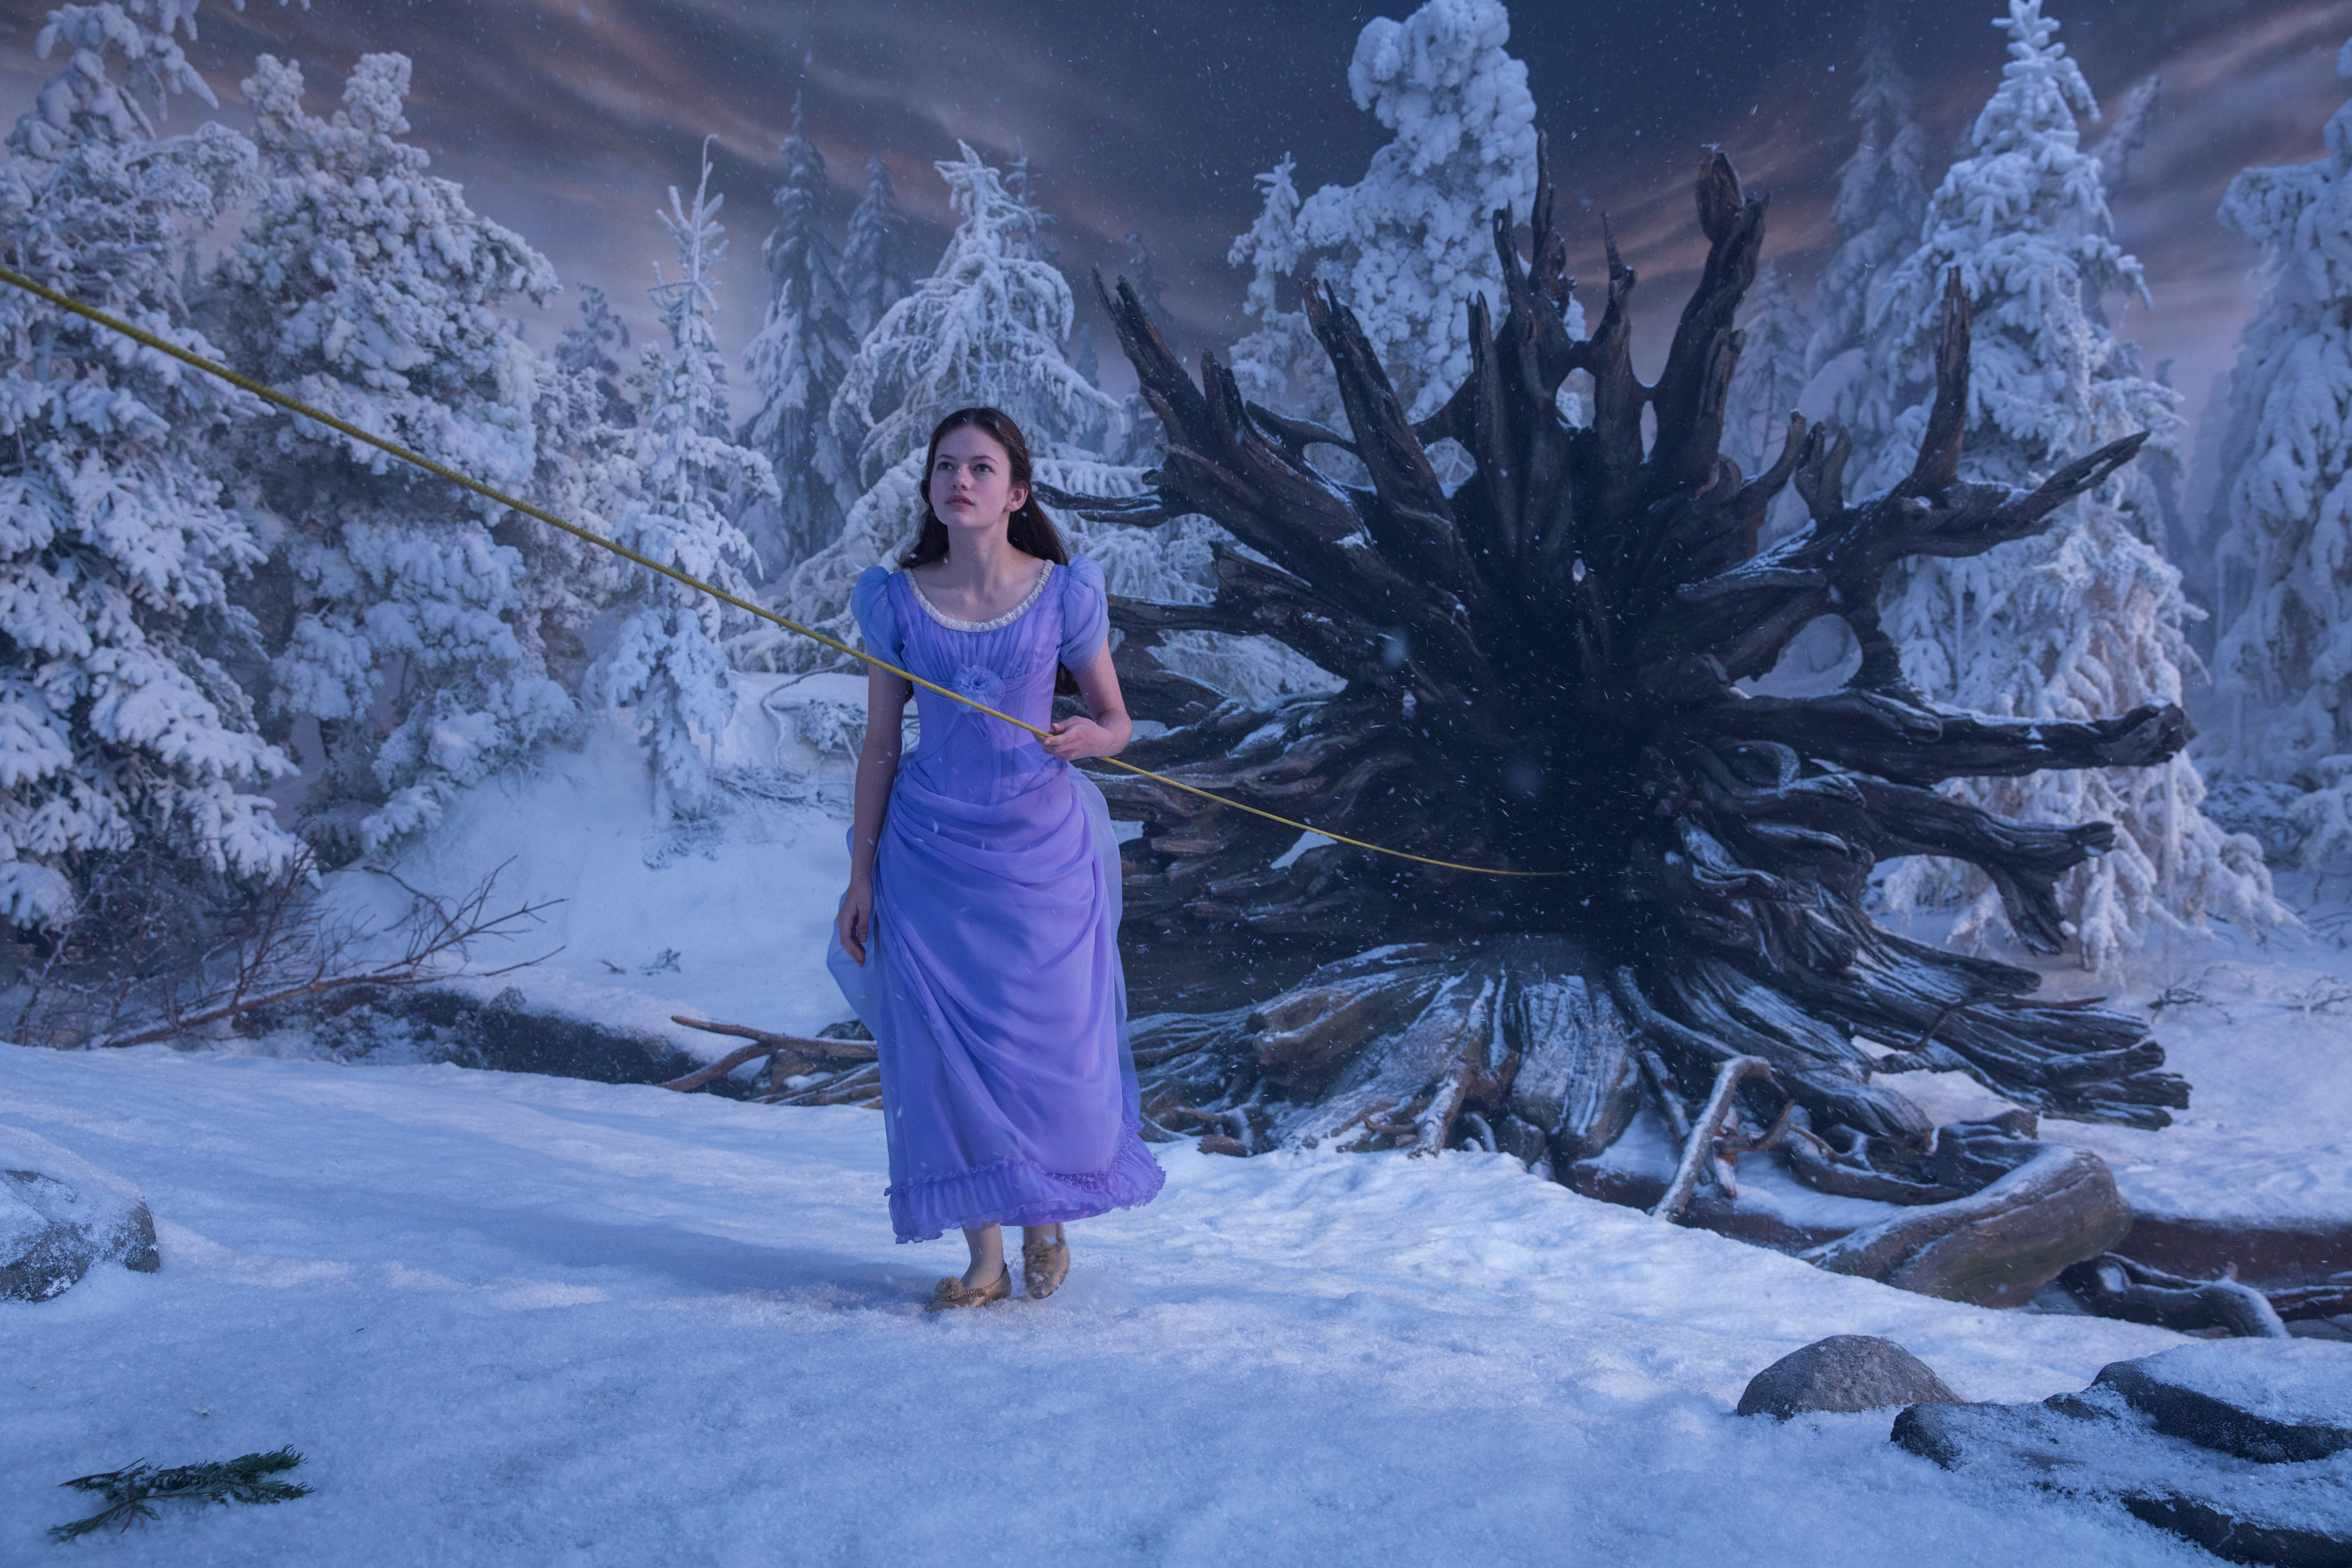 Teaser Trailer Debuts for Disney’s ‘The Nutcracker and the Four Realms’